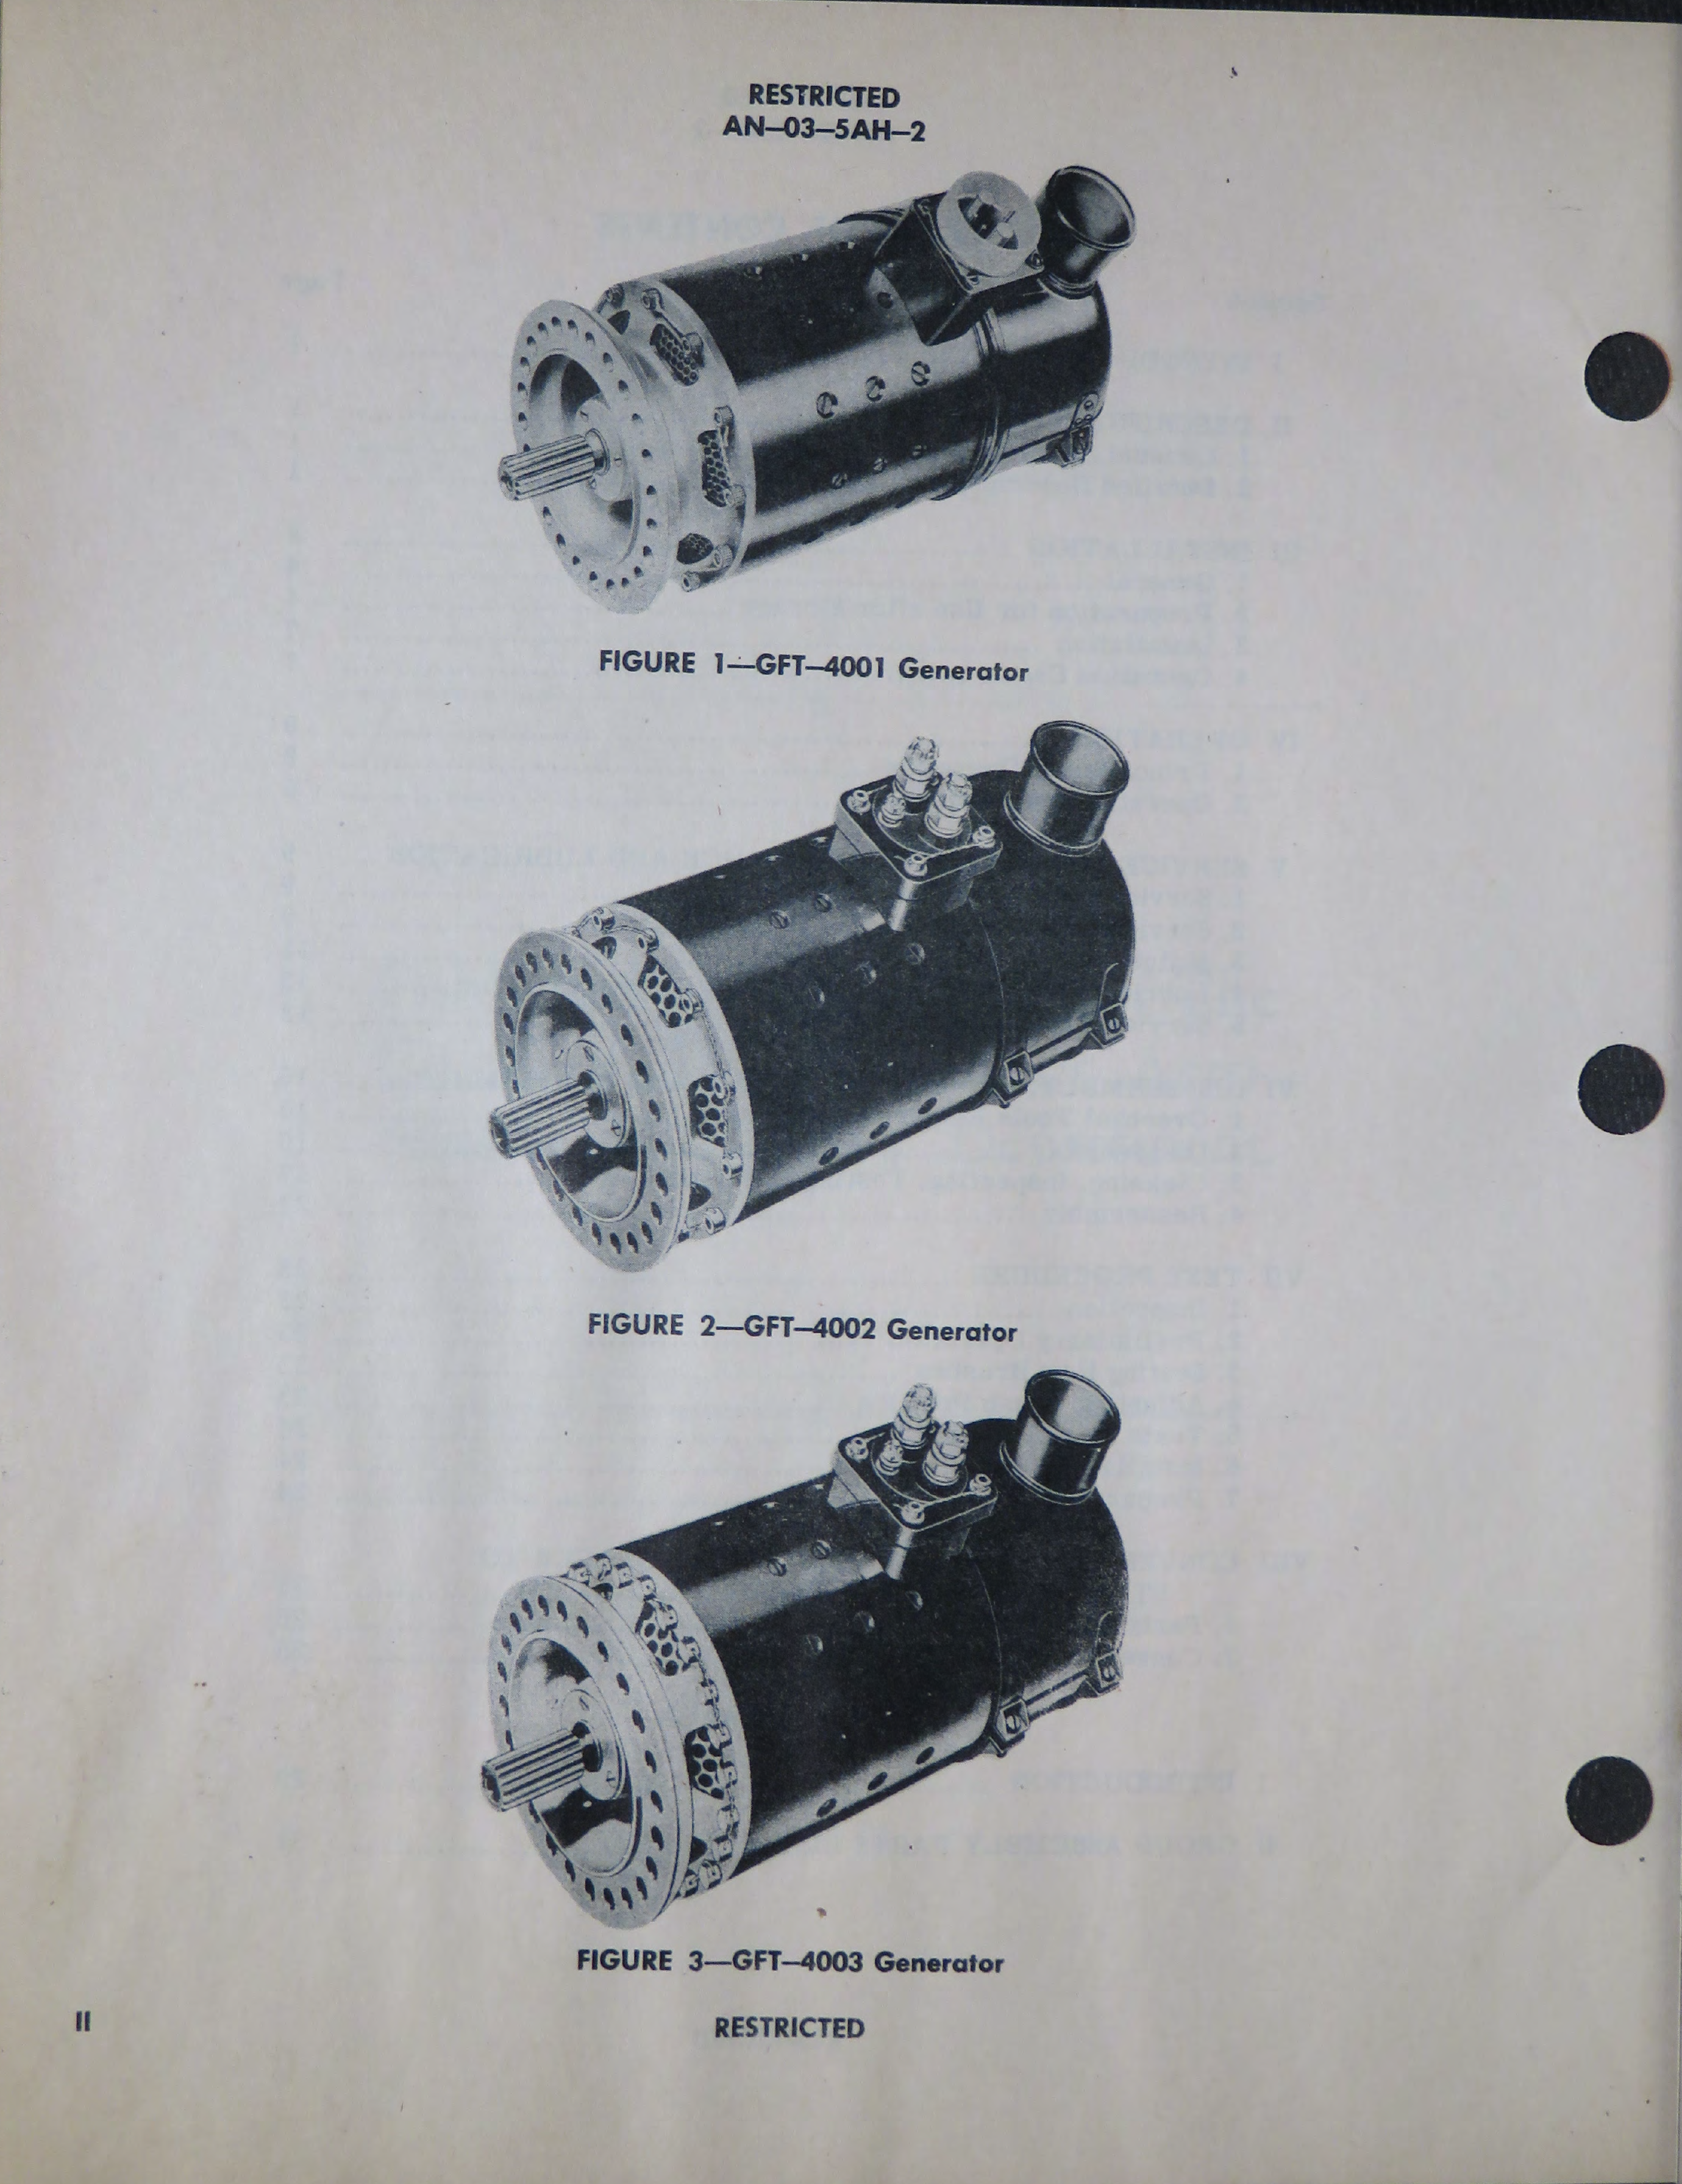 Sample page 6 from AirCorps Library document: Handbook of Instructions with Parts Catalog for Main Engine Driven Generators